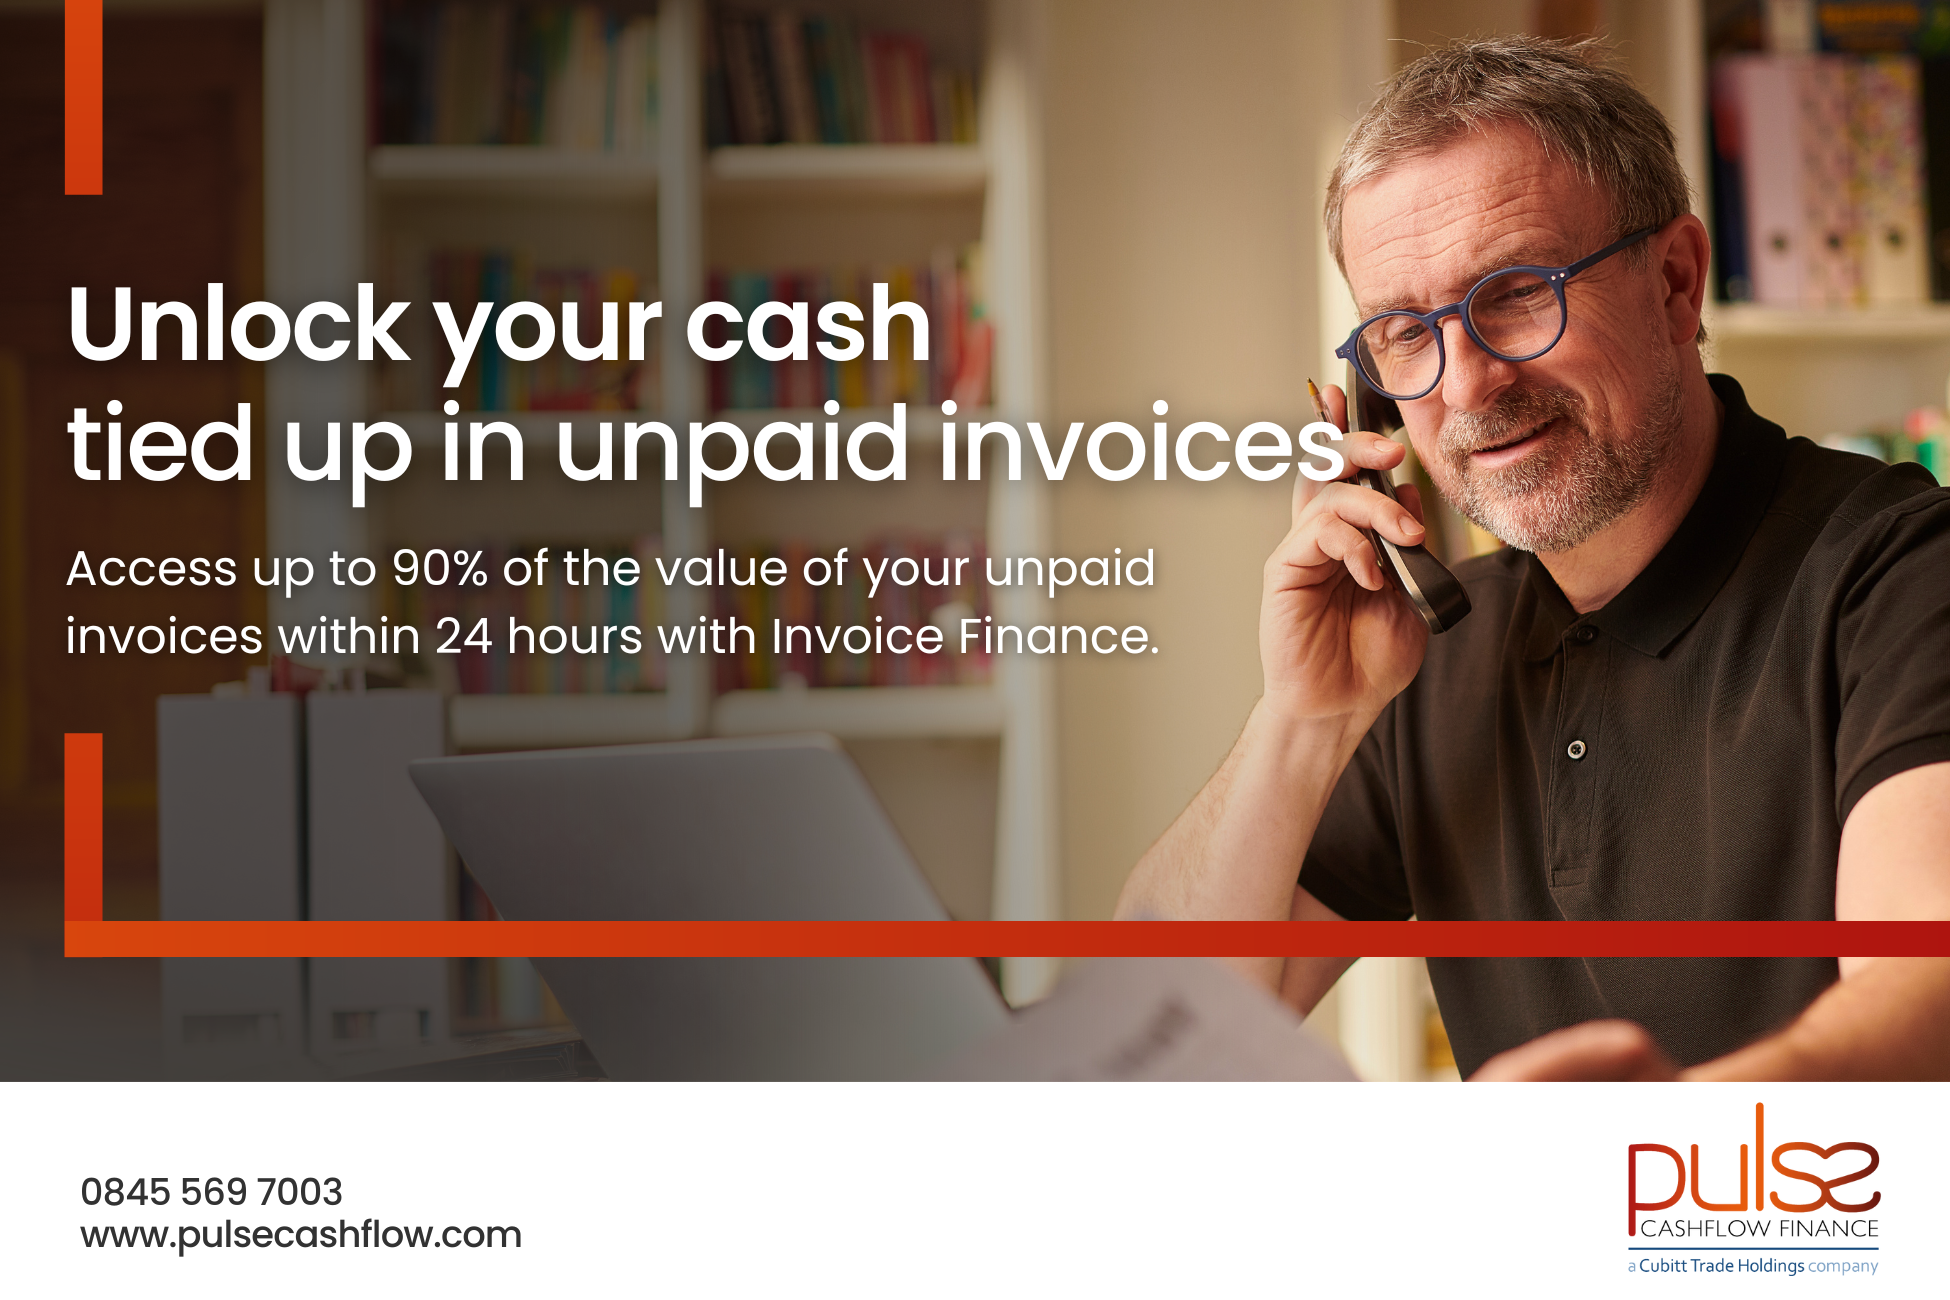 Invoice Finance Facility  : How to Unlock Cash Flow